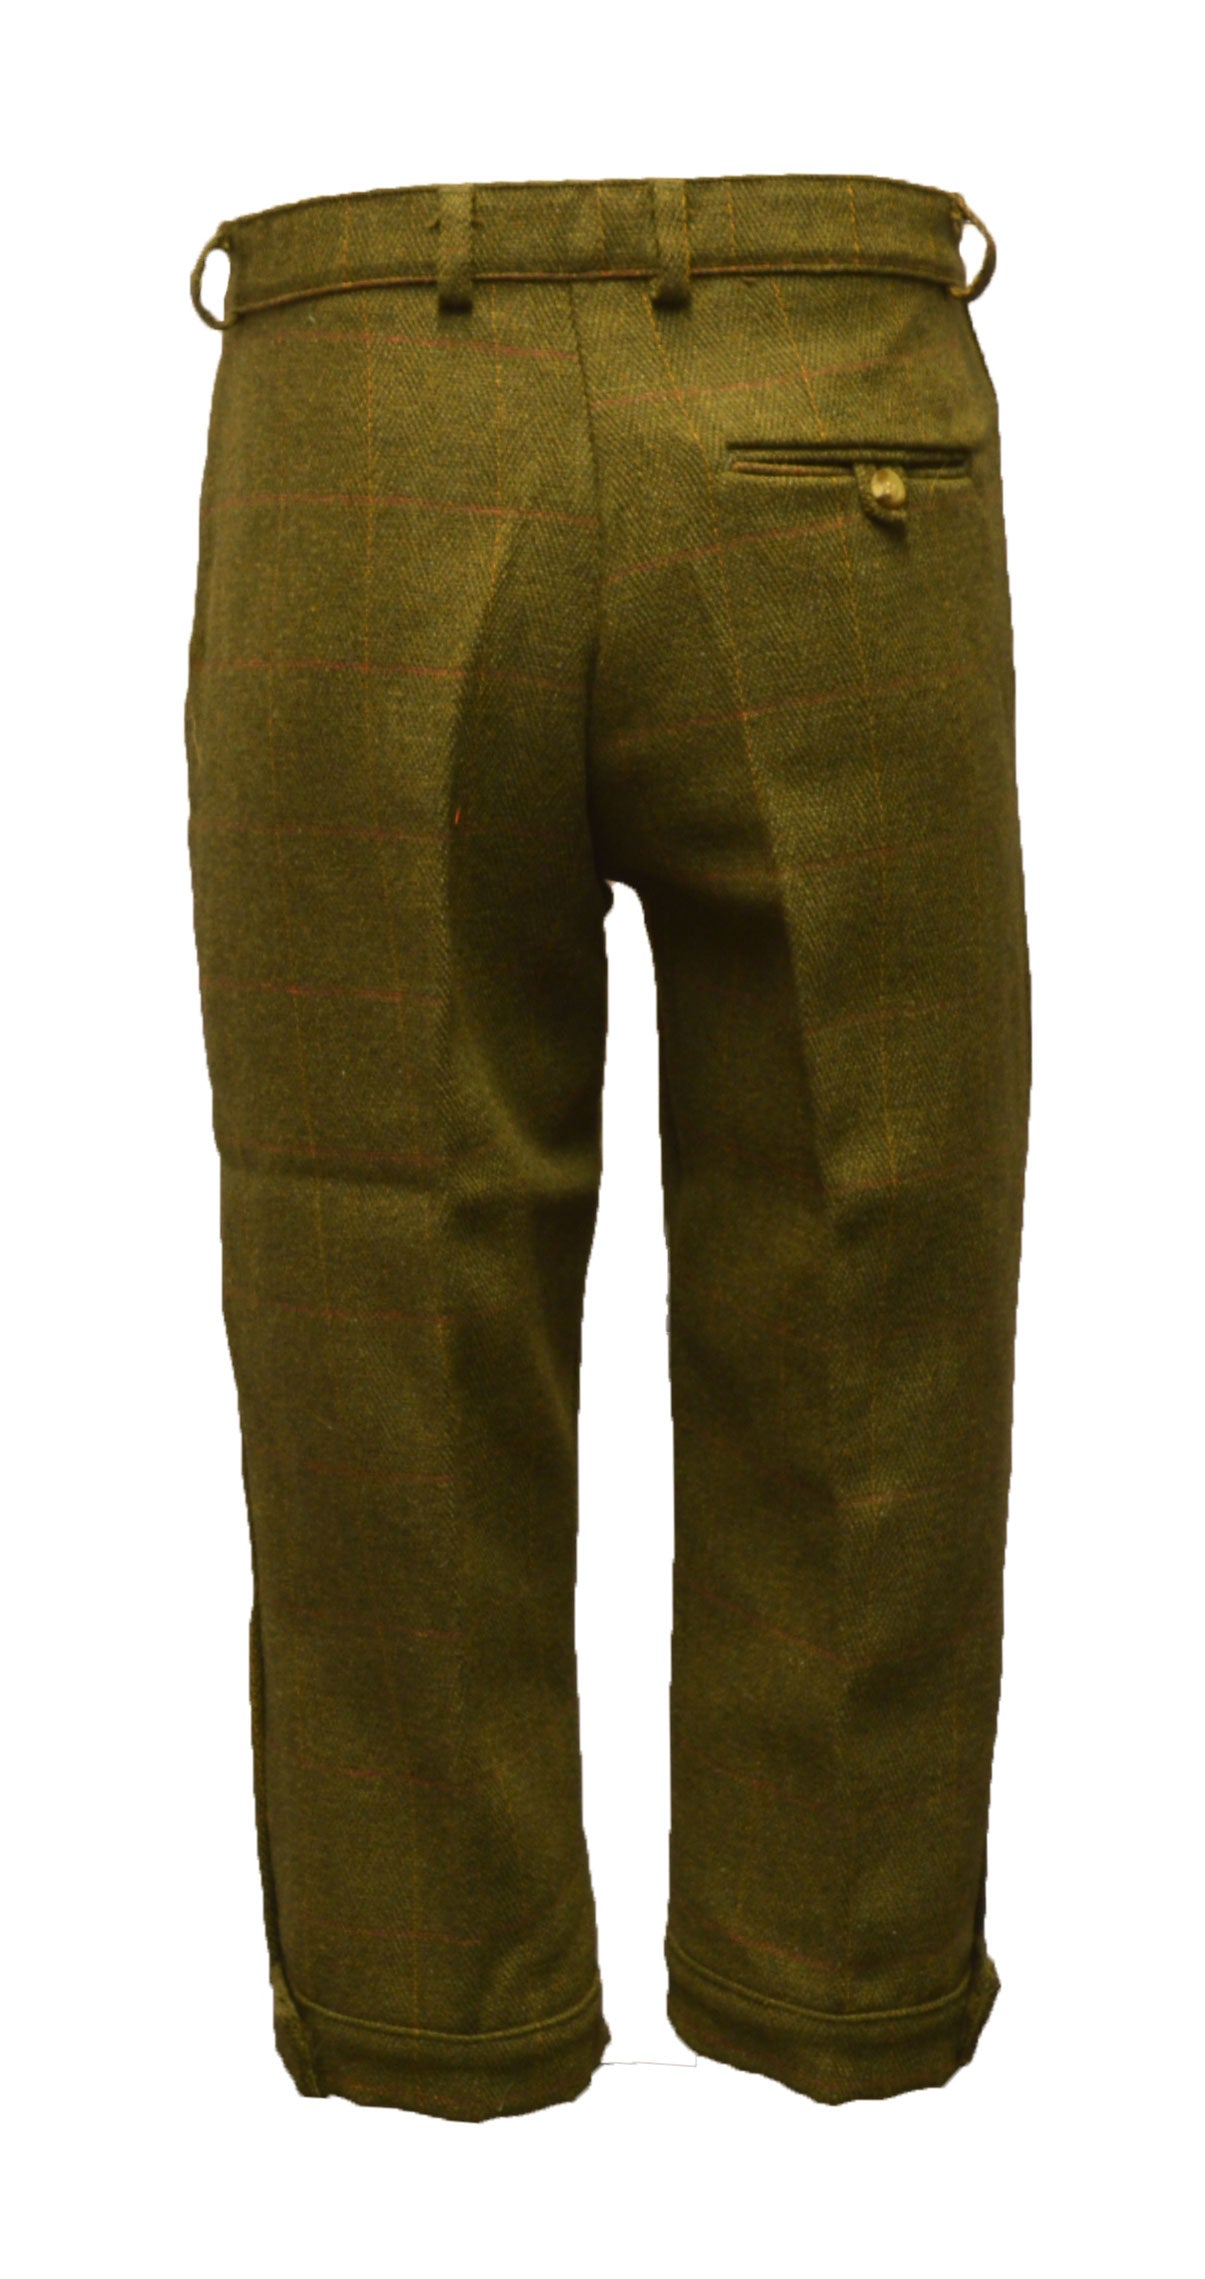 Walker & Hawkes Kids playing in HickoryGolfStore Tweed Plus Fours Golf Pants in Dark and Light Sage